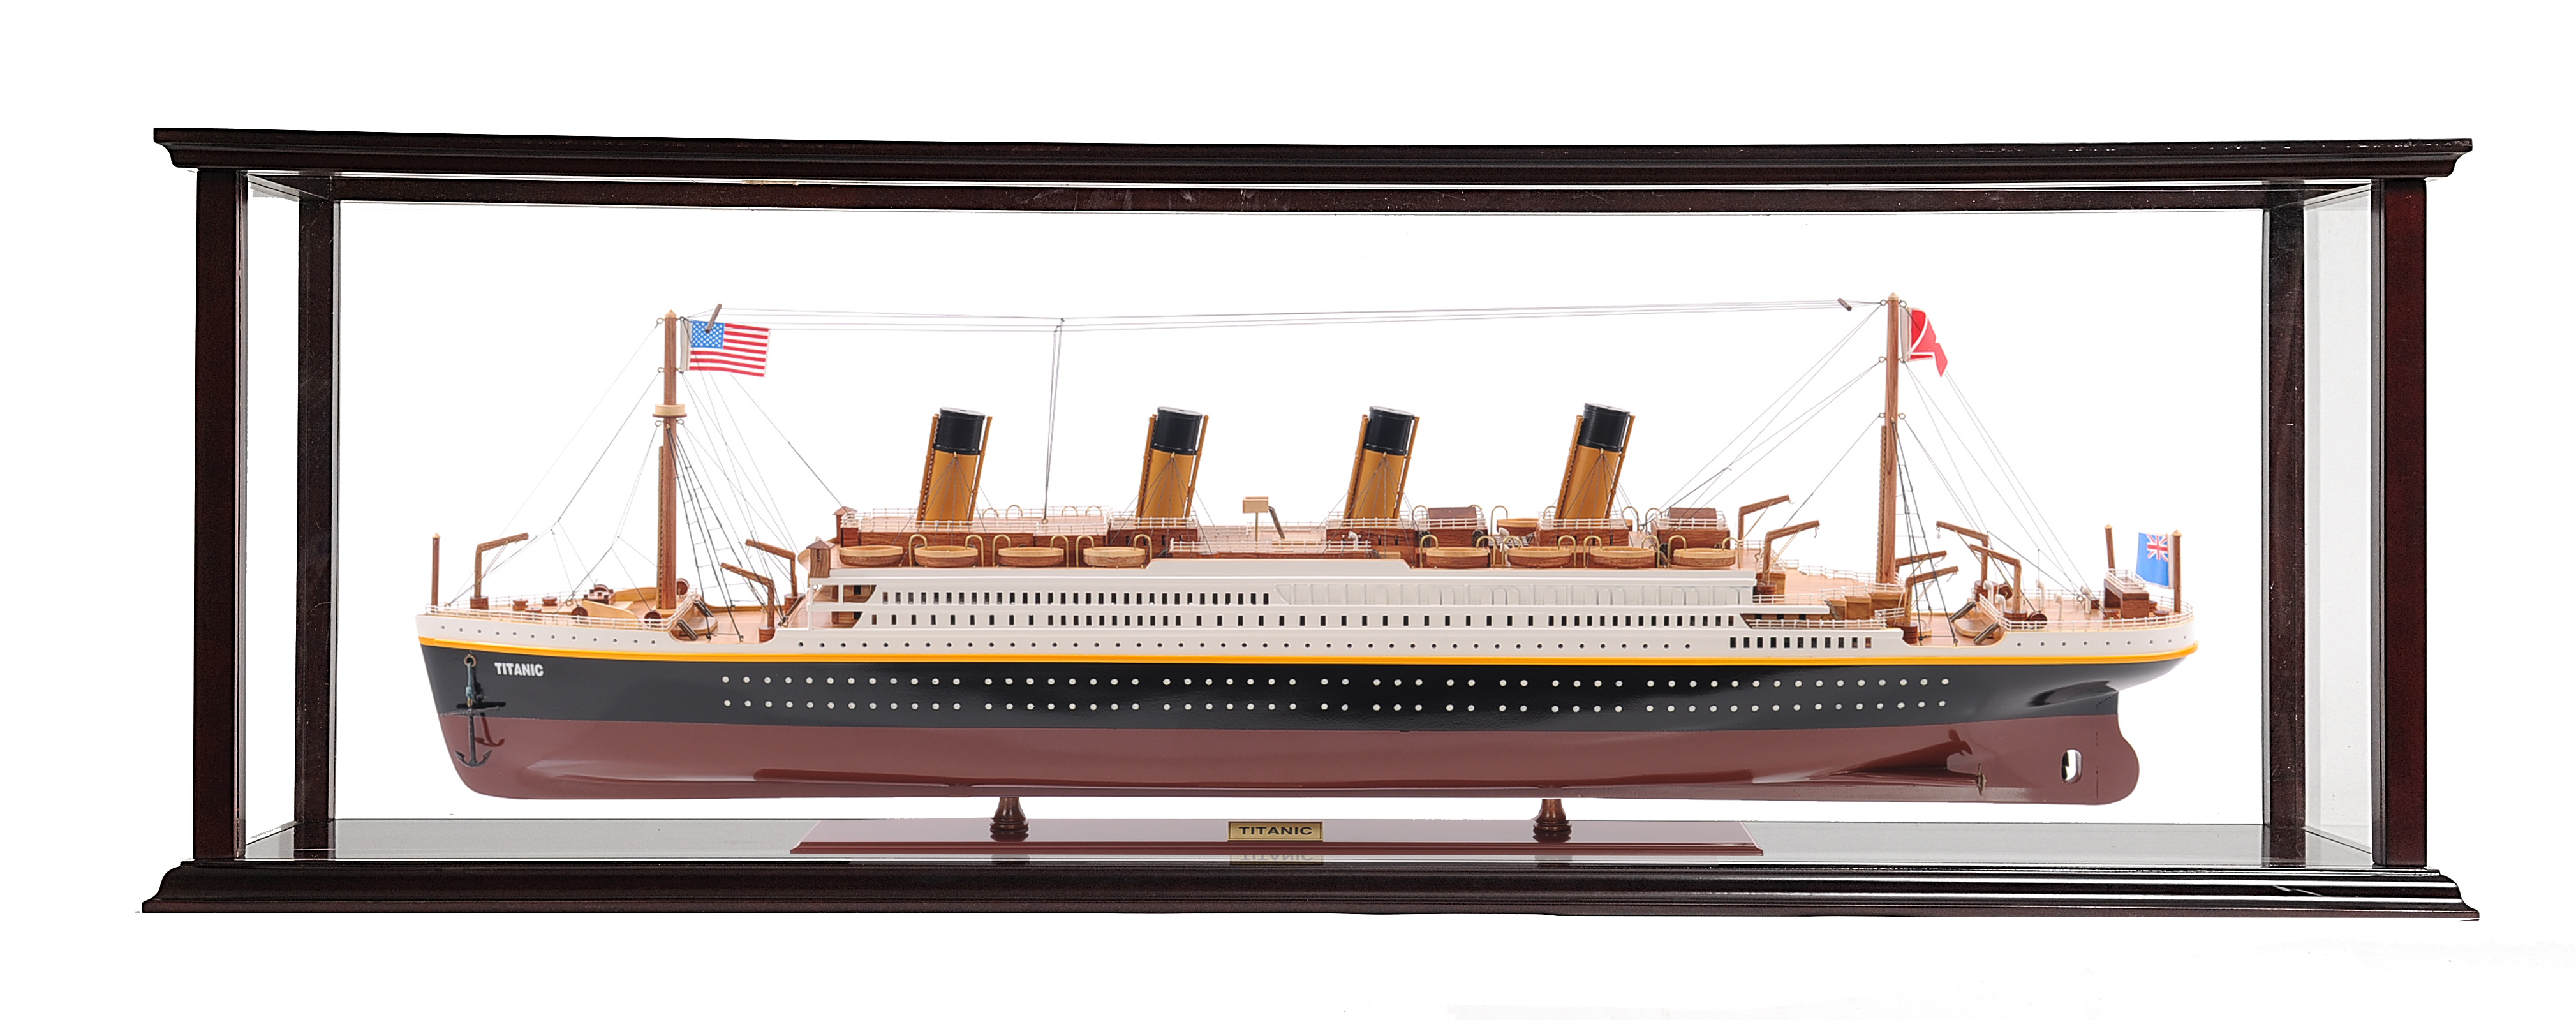 C012A RMS Titanic Large with Display Case c012a-rms-titanic-large-with-display-case-l01.jpg